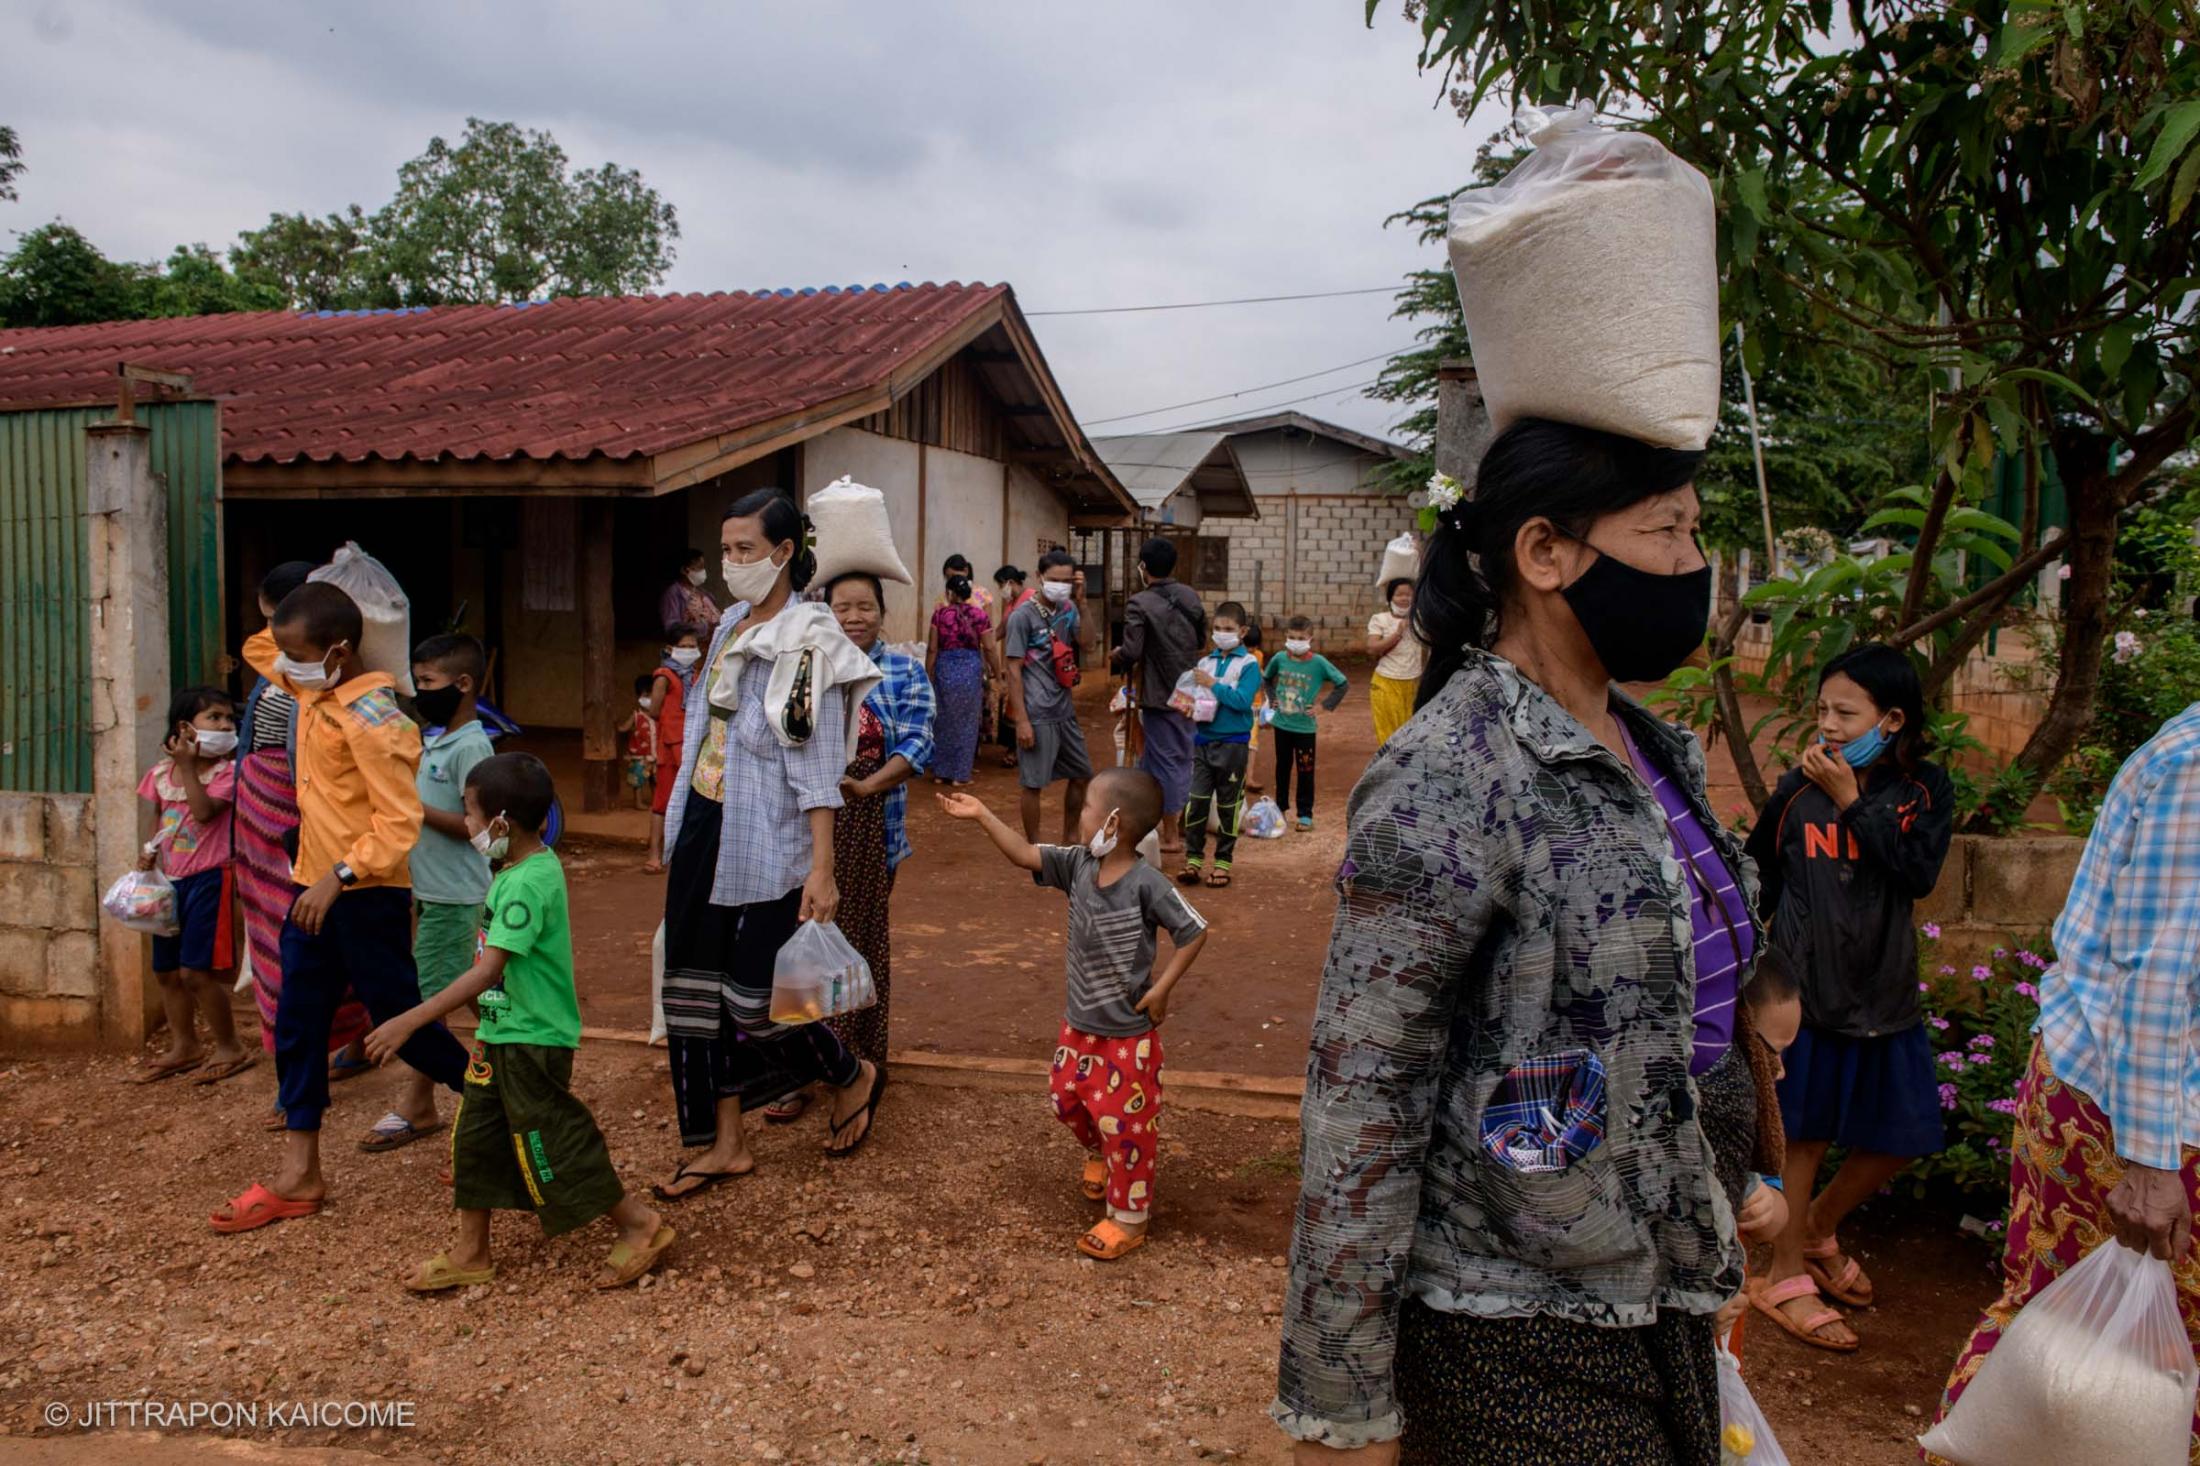 Myanmar migrants in the village along the Thai-Myanmar border have been affected by the lockdown against Coivd-19 receiving food handouts in Phop Phra, Tak, Thailand in May 2020.